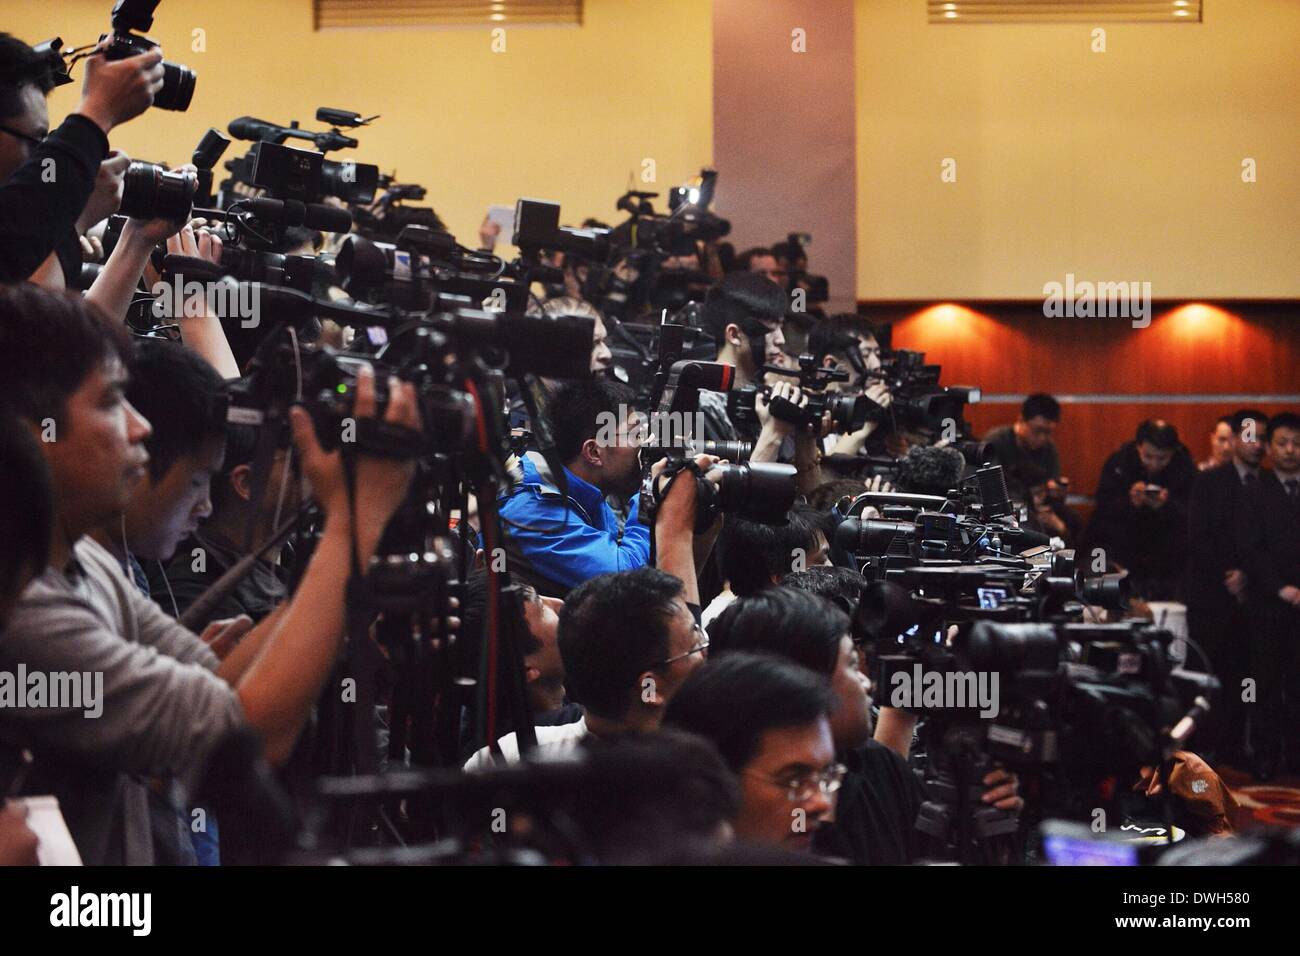 Beijing, China. 9th Mar, 2014. Photographers take photos during the Malaysia Airlines press conference in Beijing on missing flight MH 370 on March 9, 2014. Credit:  Wang Quanchao/Xinhua/Alamy Live News Stock Photo